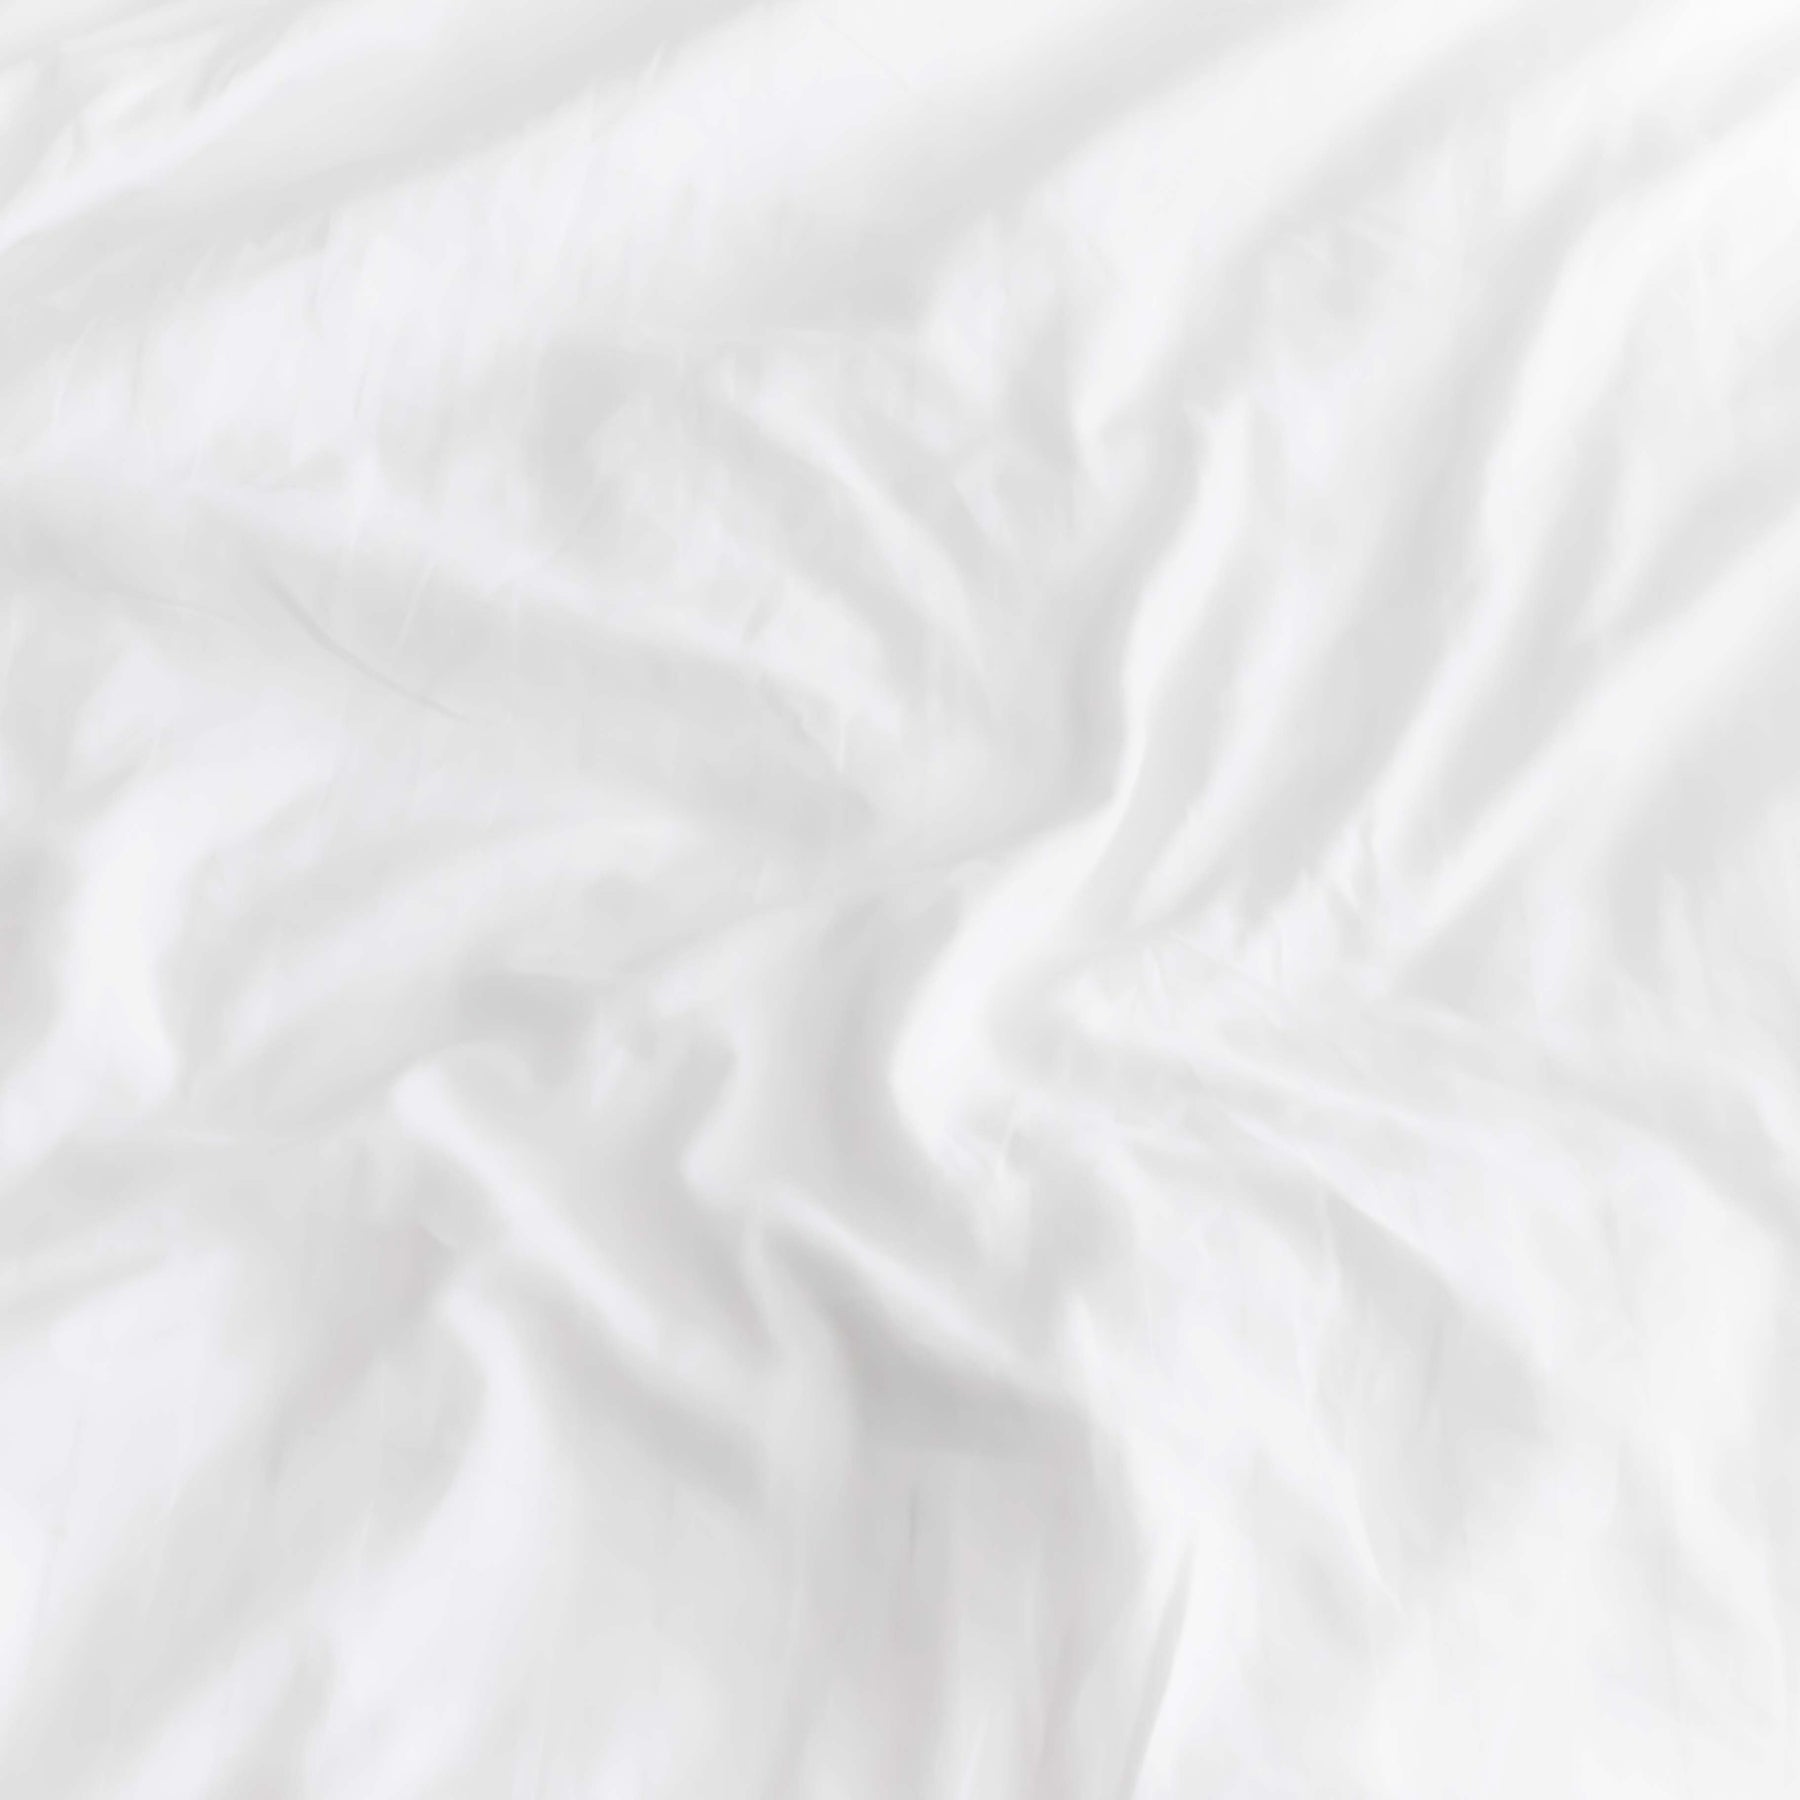 Cotton Rich Percale Hotel Quality Flat Bed Sheets Set Of 3, 6, 12 - White